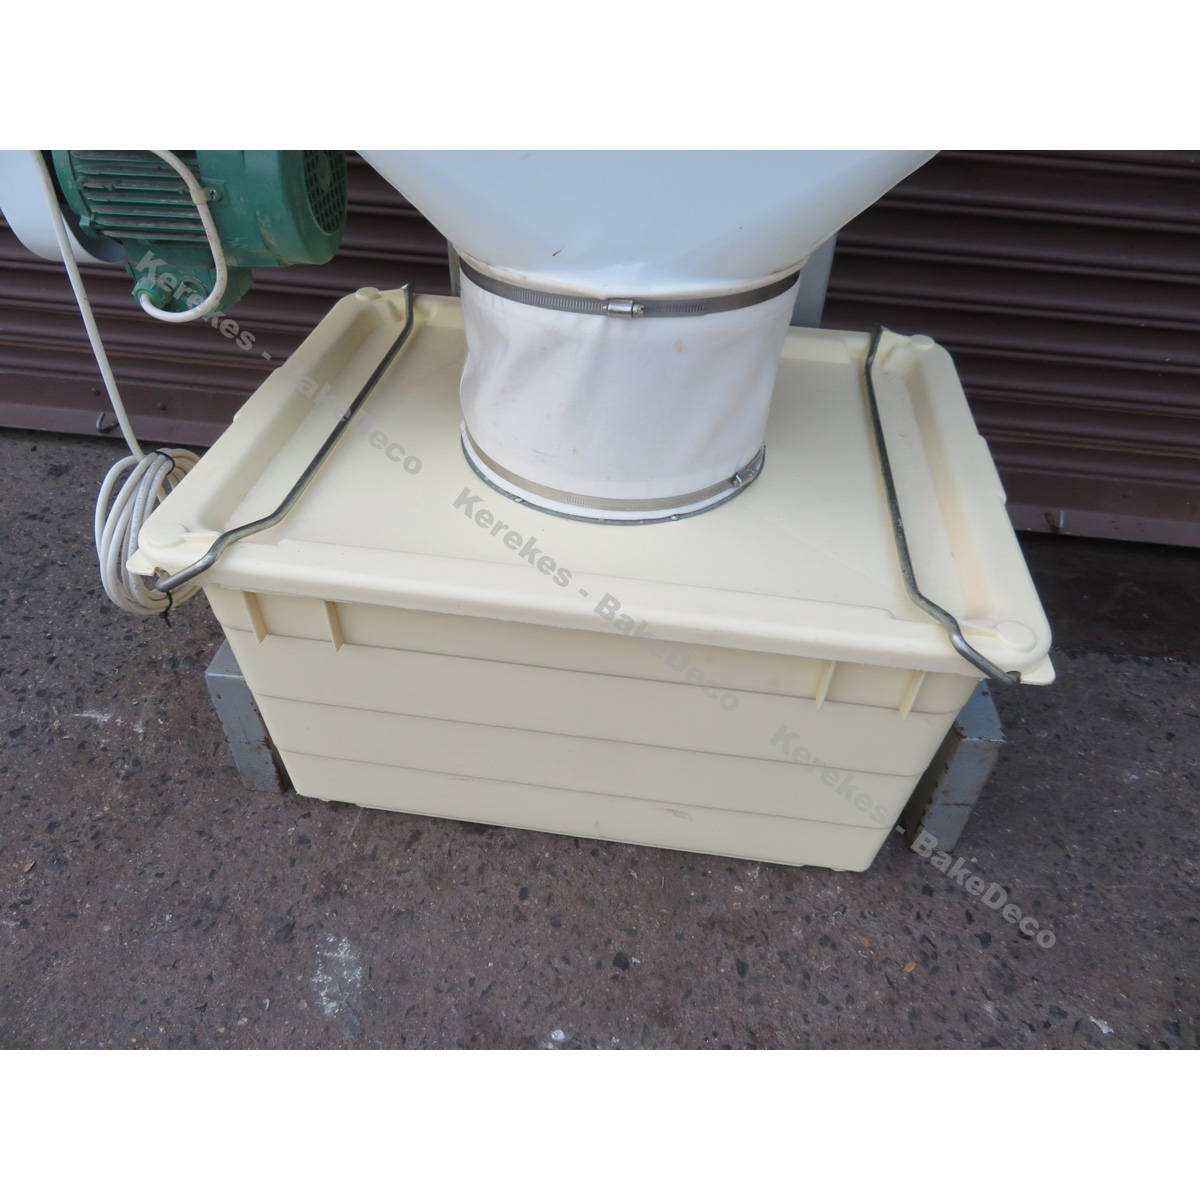 Koralek-Almog Commercial 50 Mesh Flour Sifter GLZ 200X500, Used Excellent Condition image 3